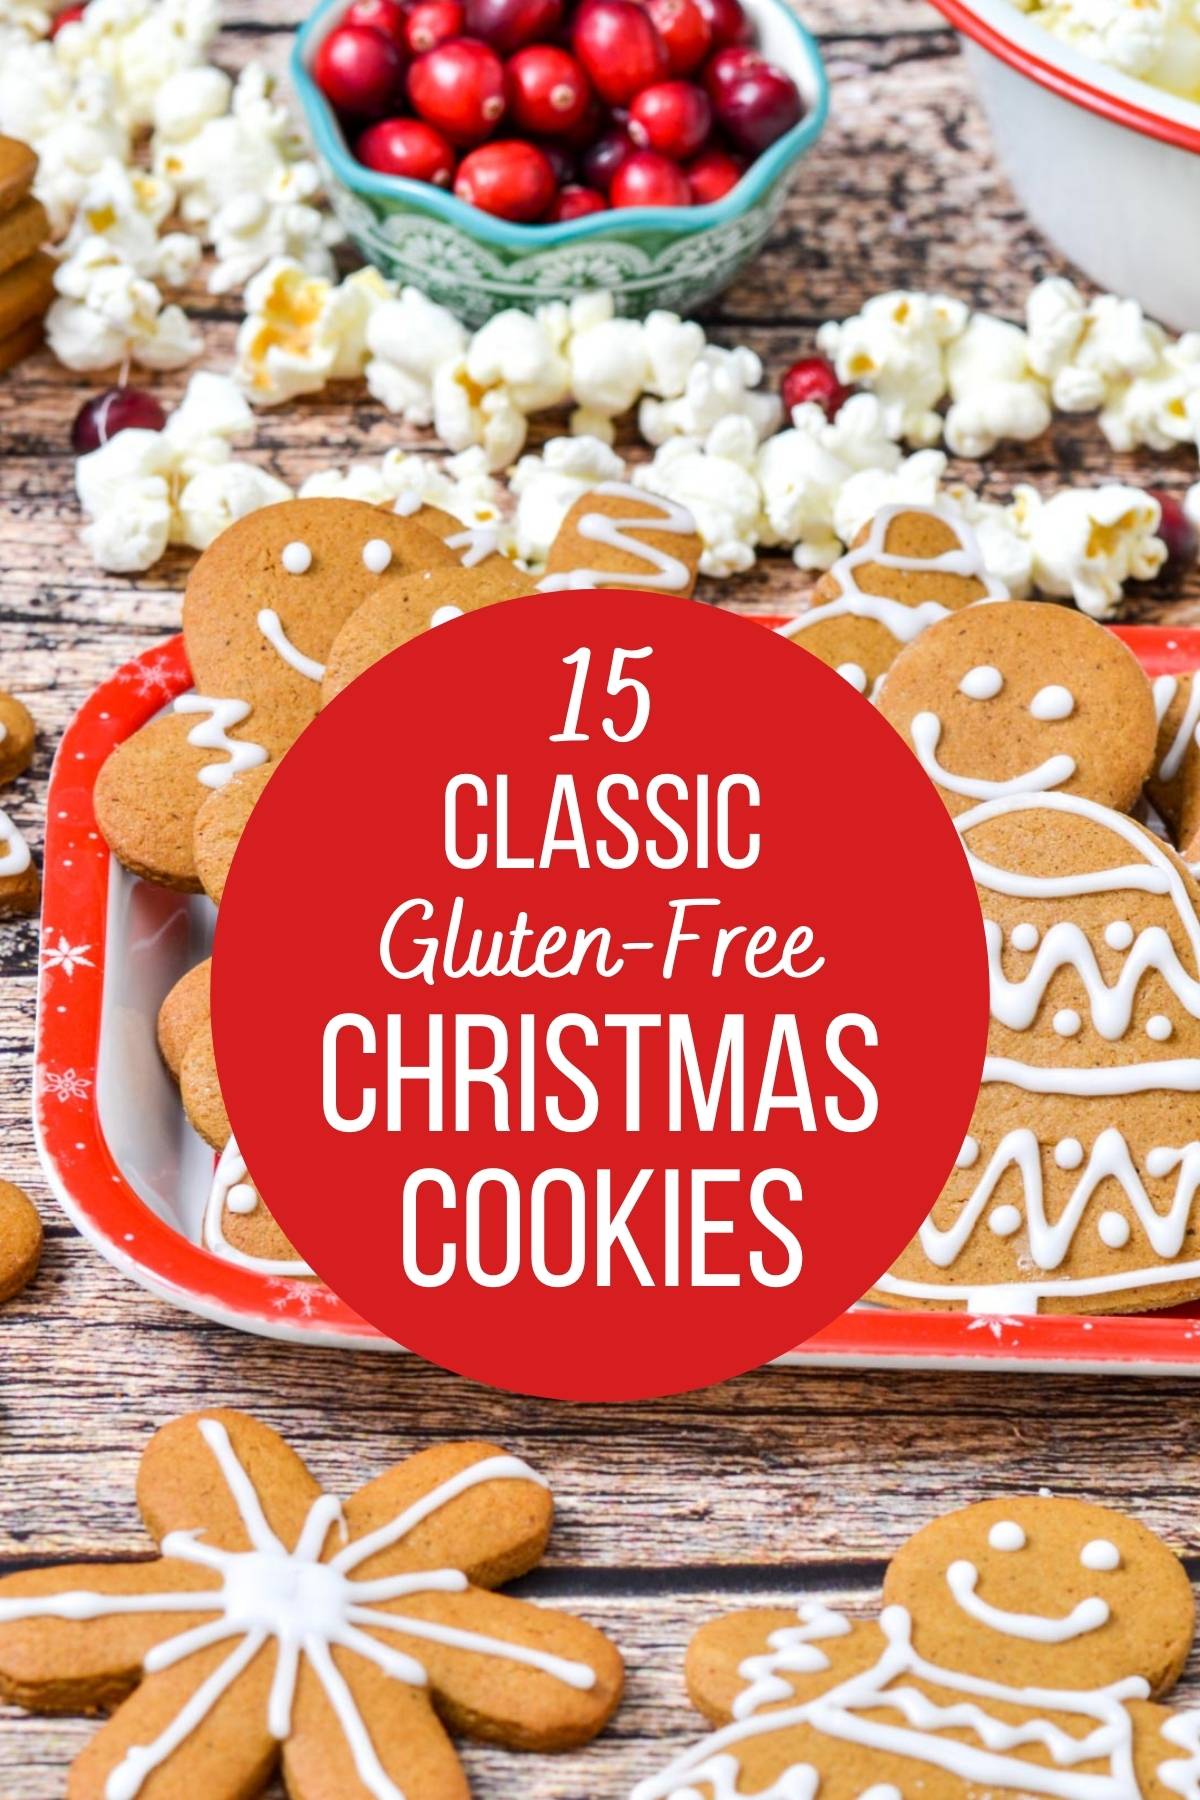 Classic gluten-free gingerbread cookies with a graphic over the top saying 15 Classic Gluten-Free Christmas Cookies.